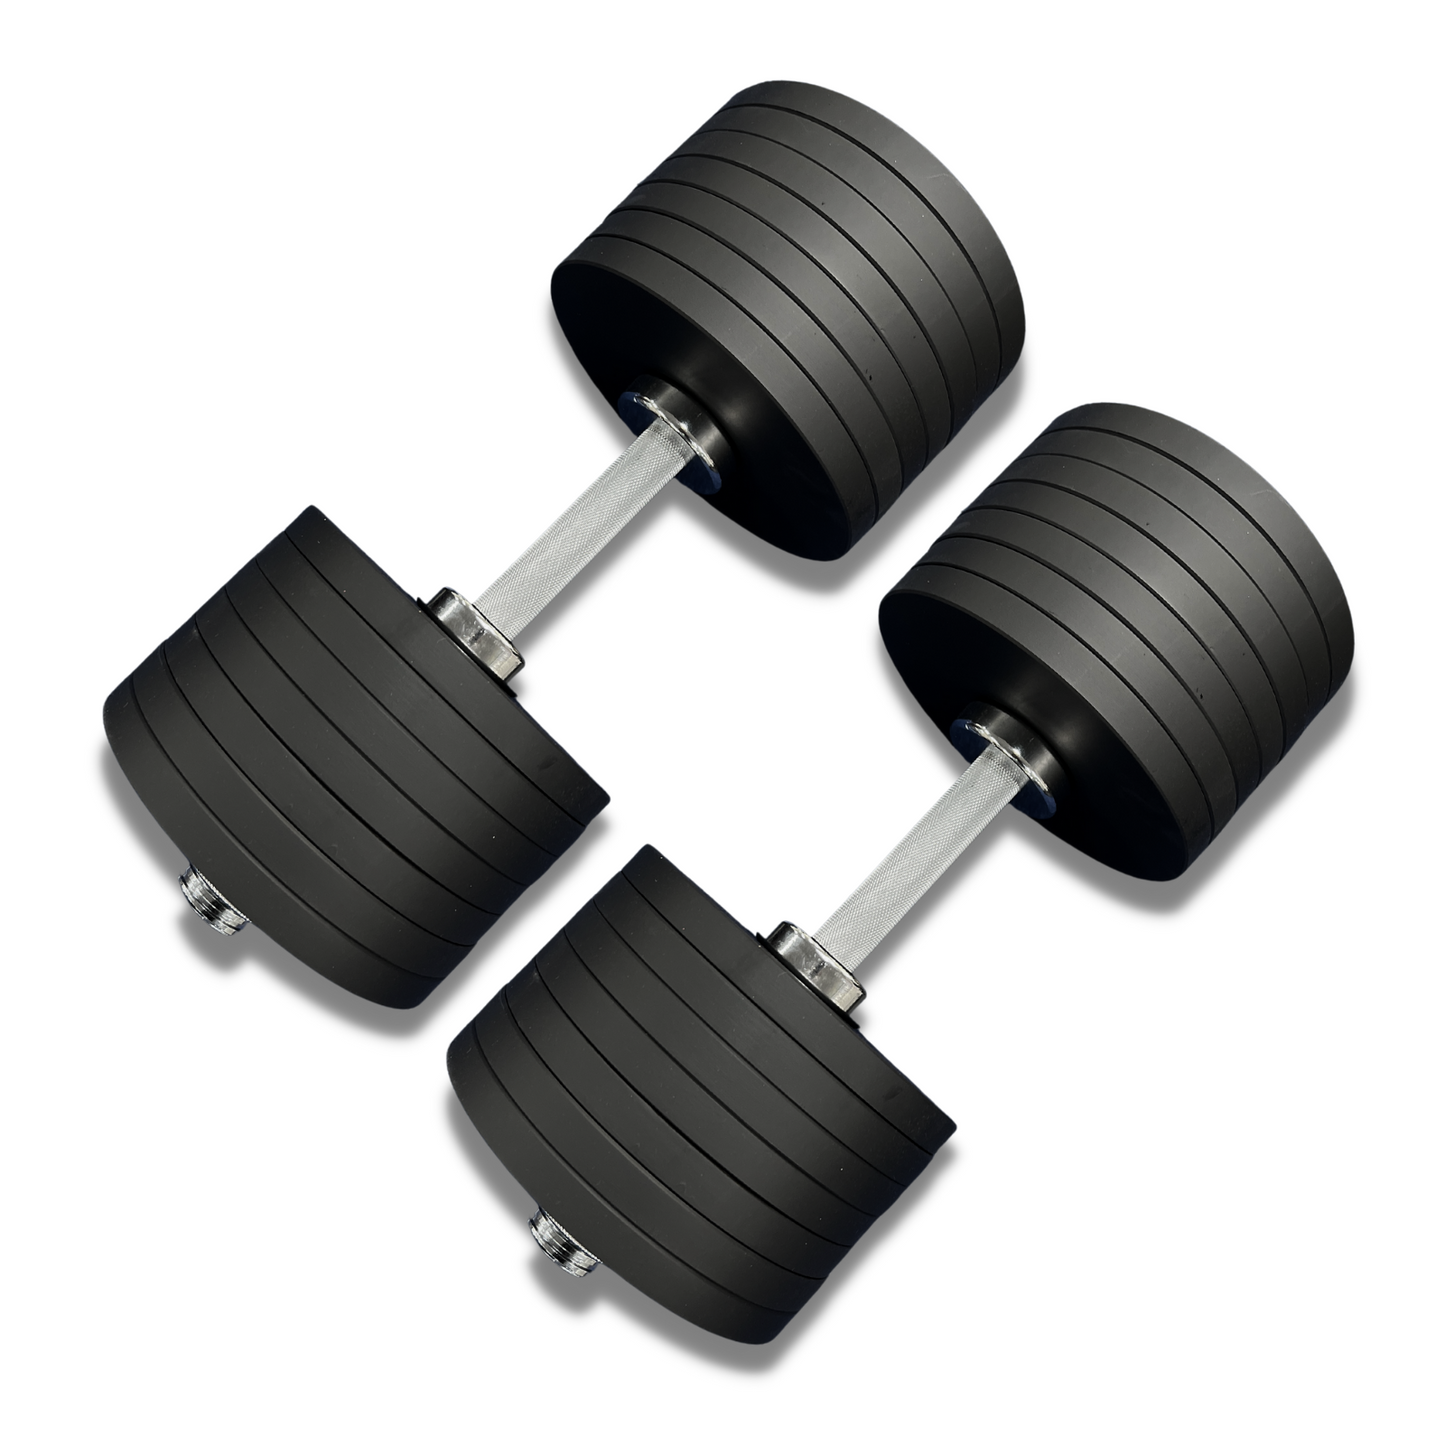 Muscle Motion Cast Iron Adjustable Olympic Dumbbell Set-Gym Direct